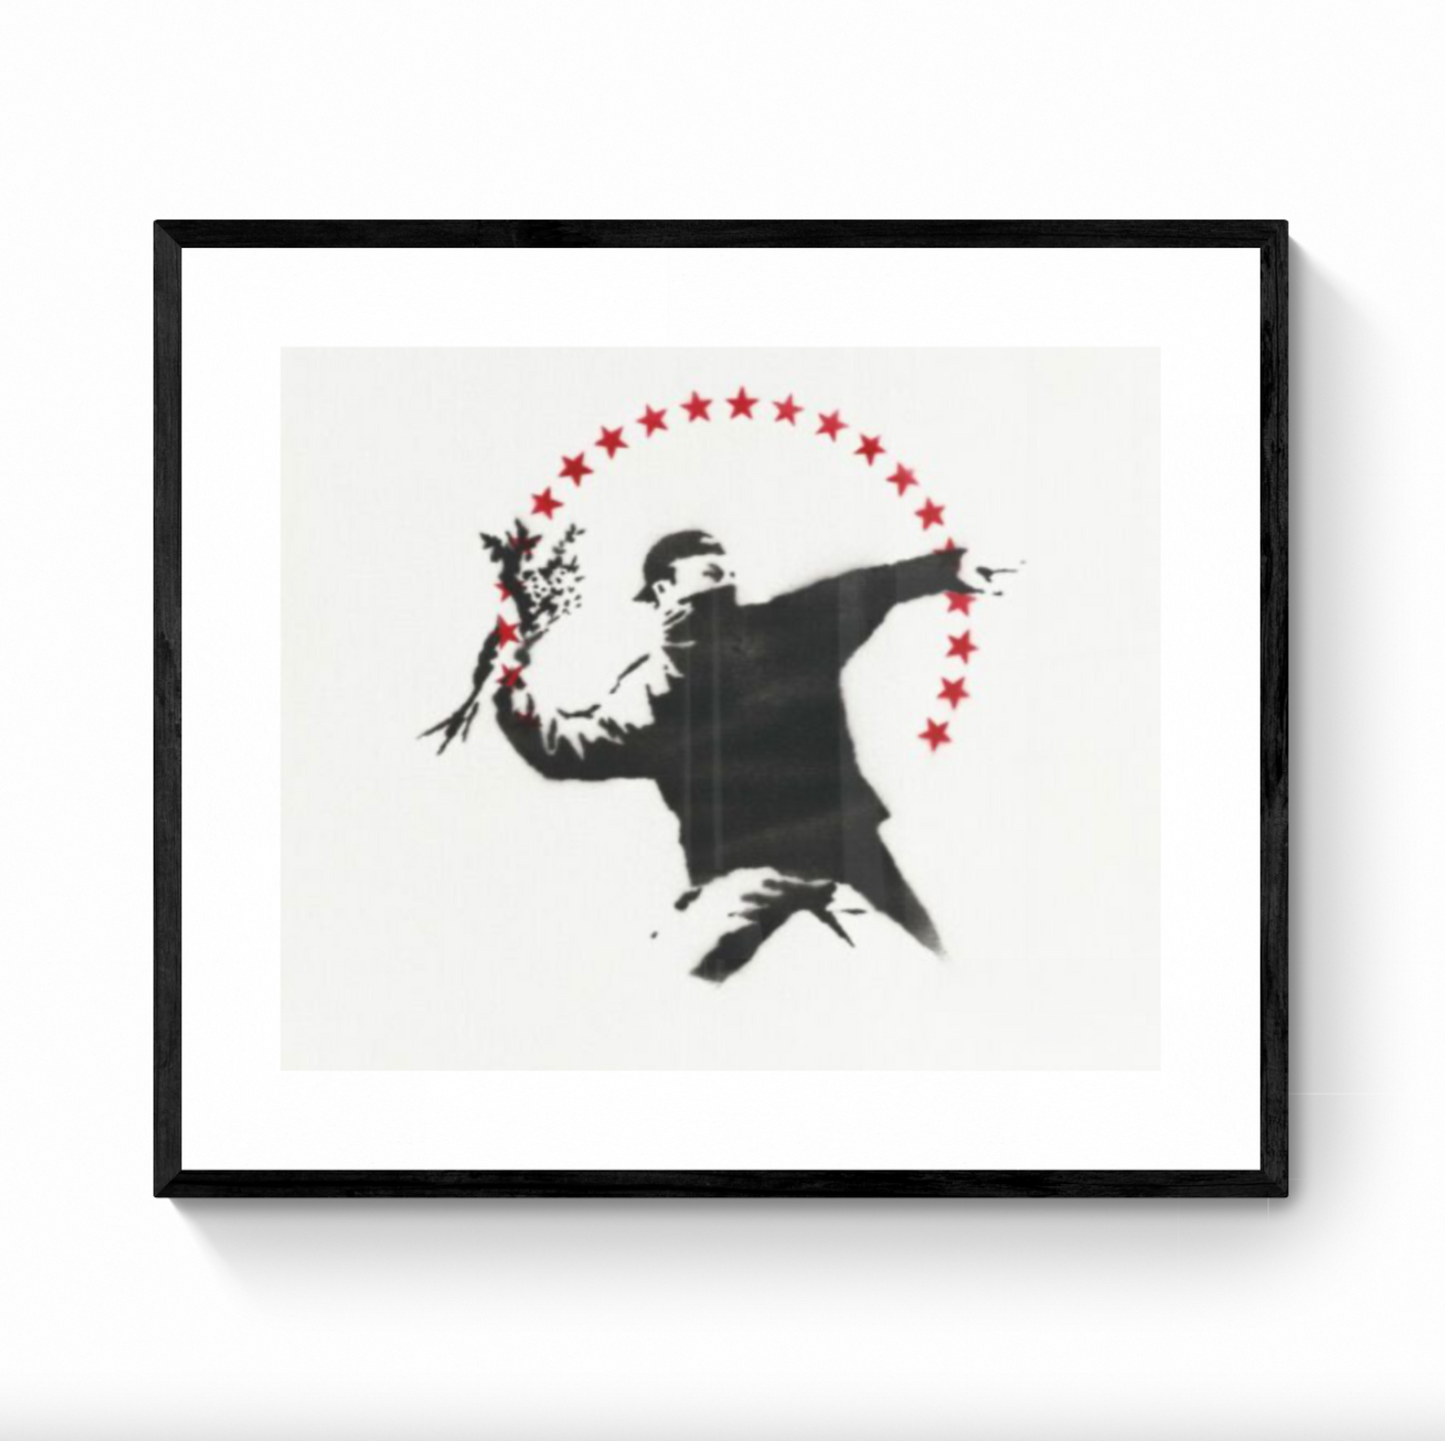 Banksy - Love is in the air (Stars Edition)